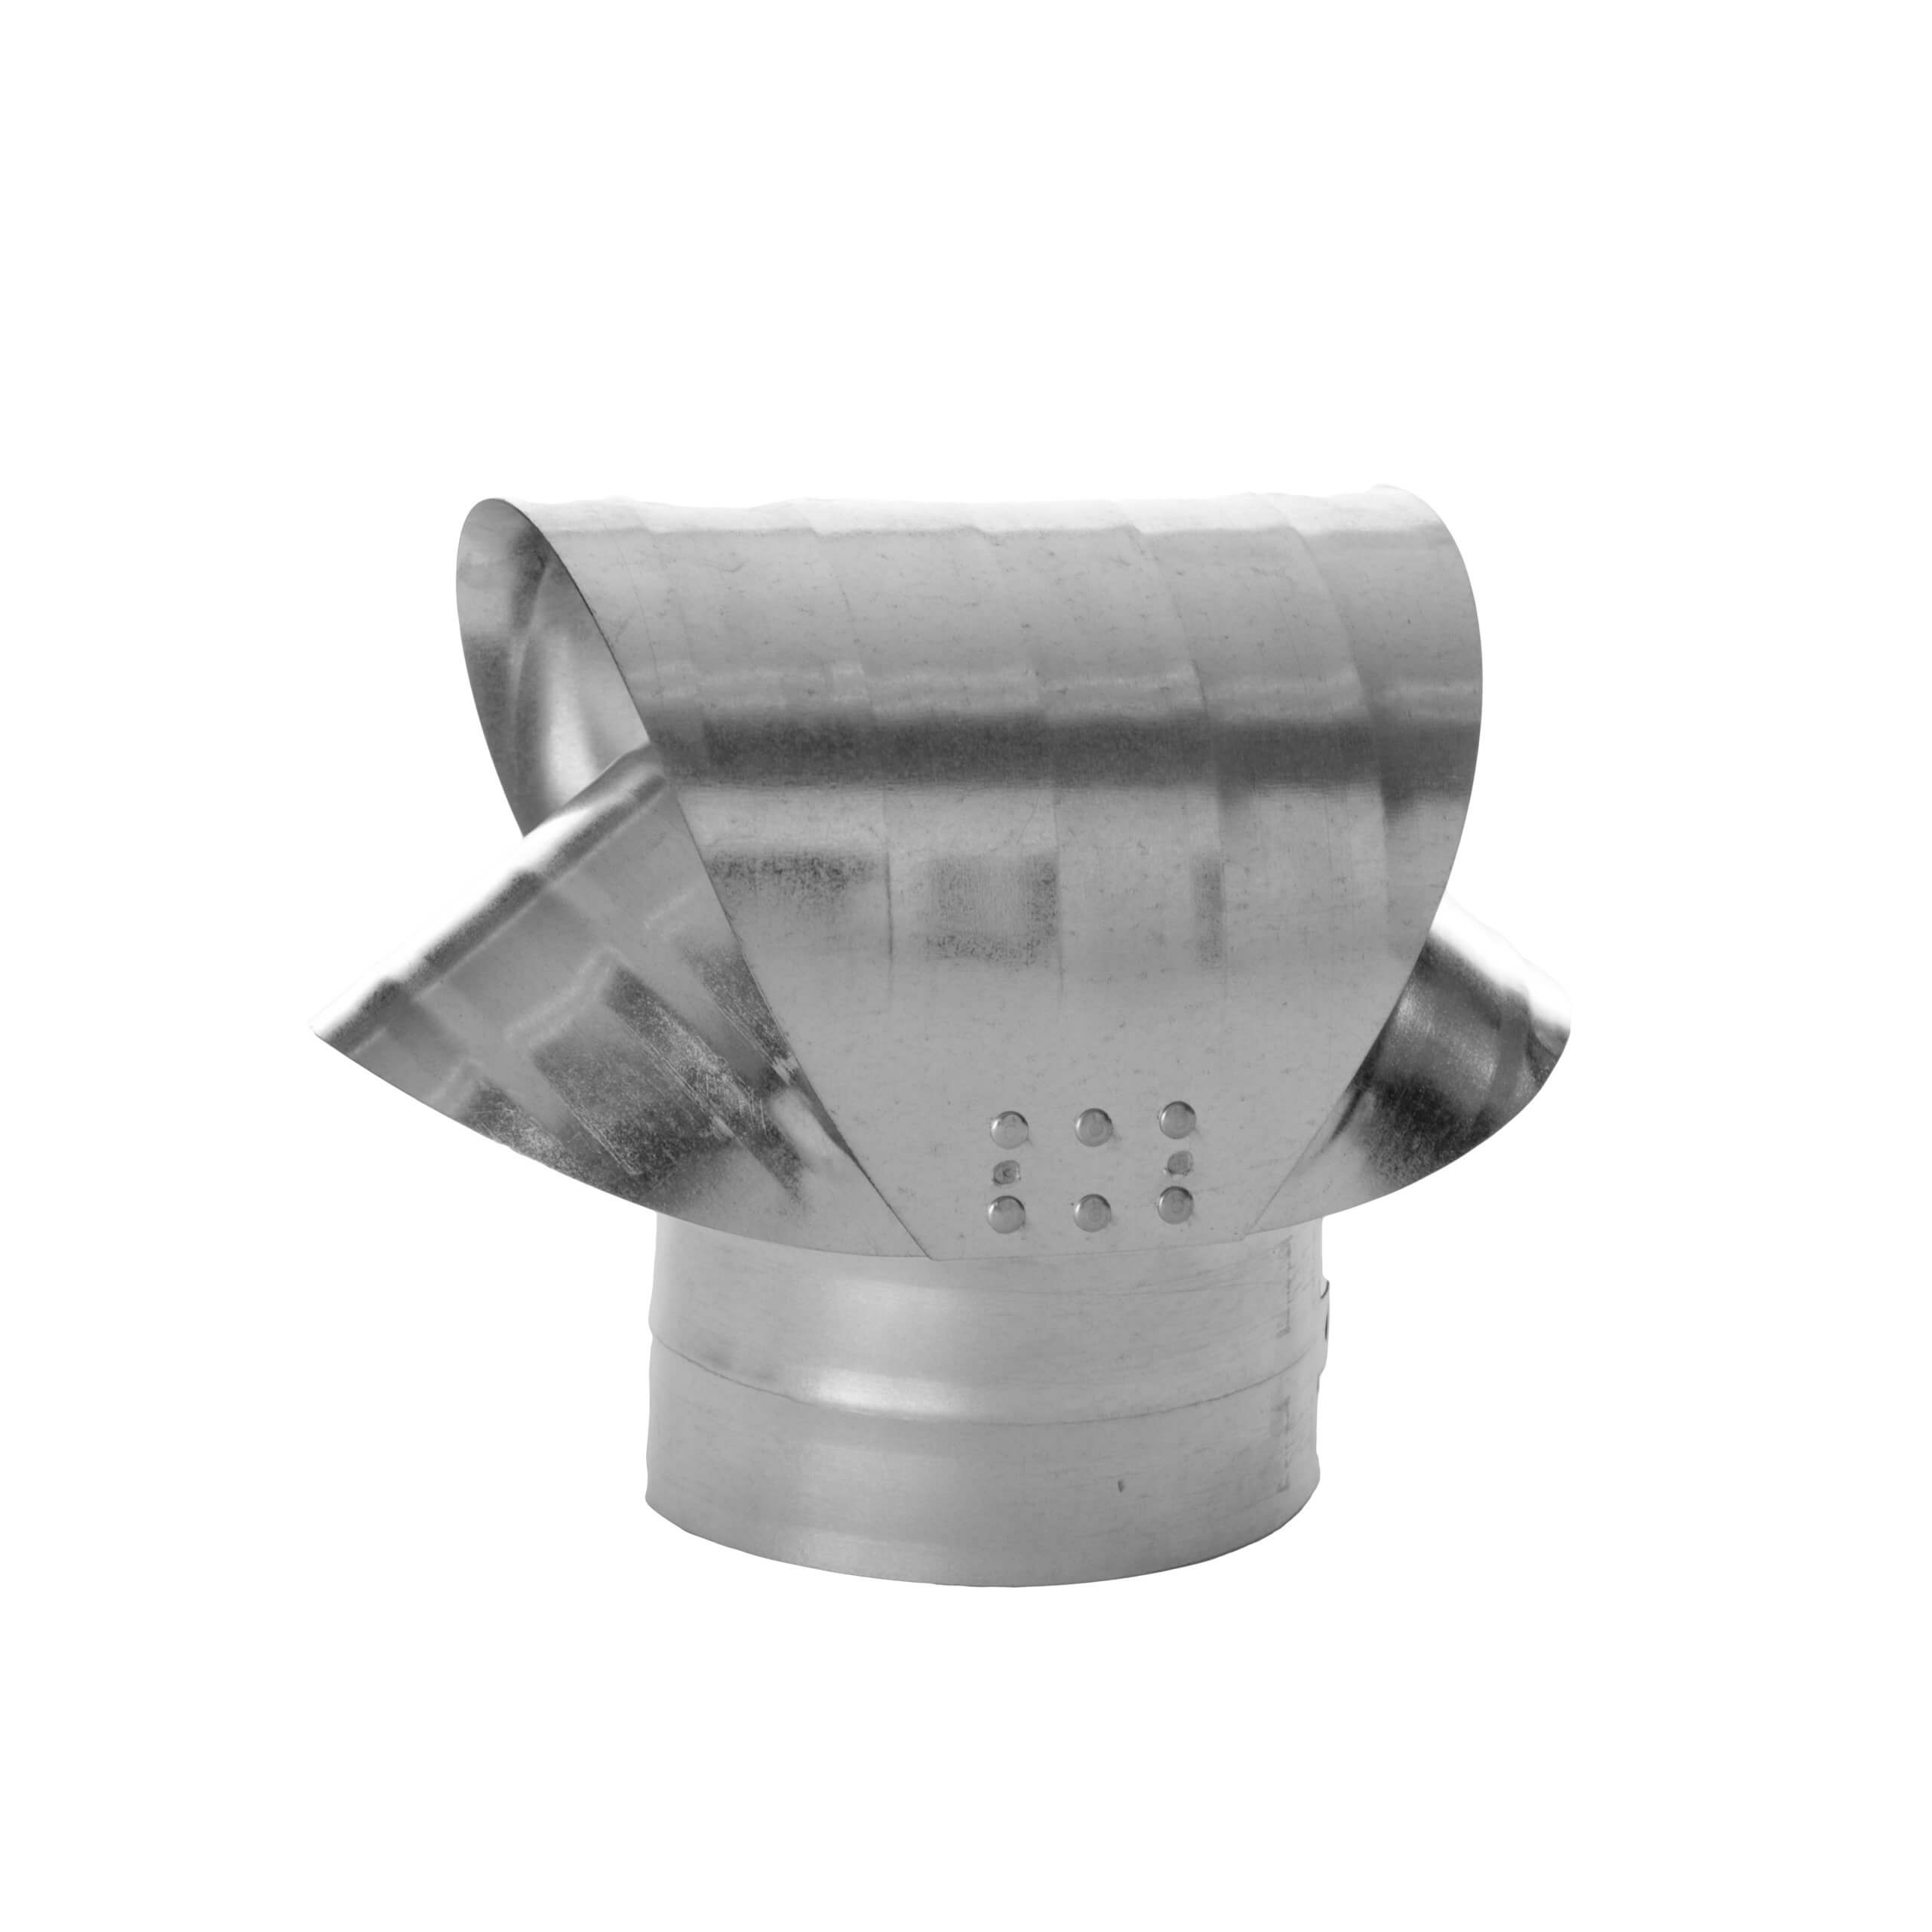 Side view of FAMCO Round Base Chimney Vacuum Cap in galvanized steel.